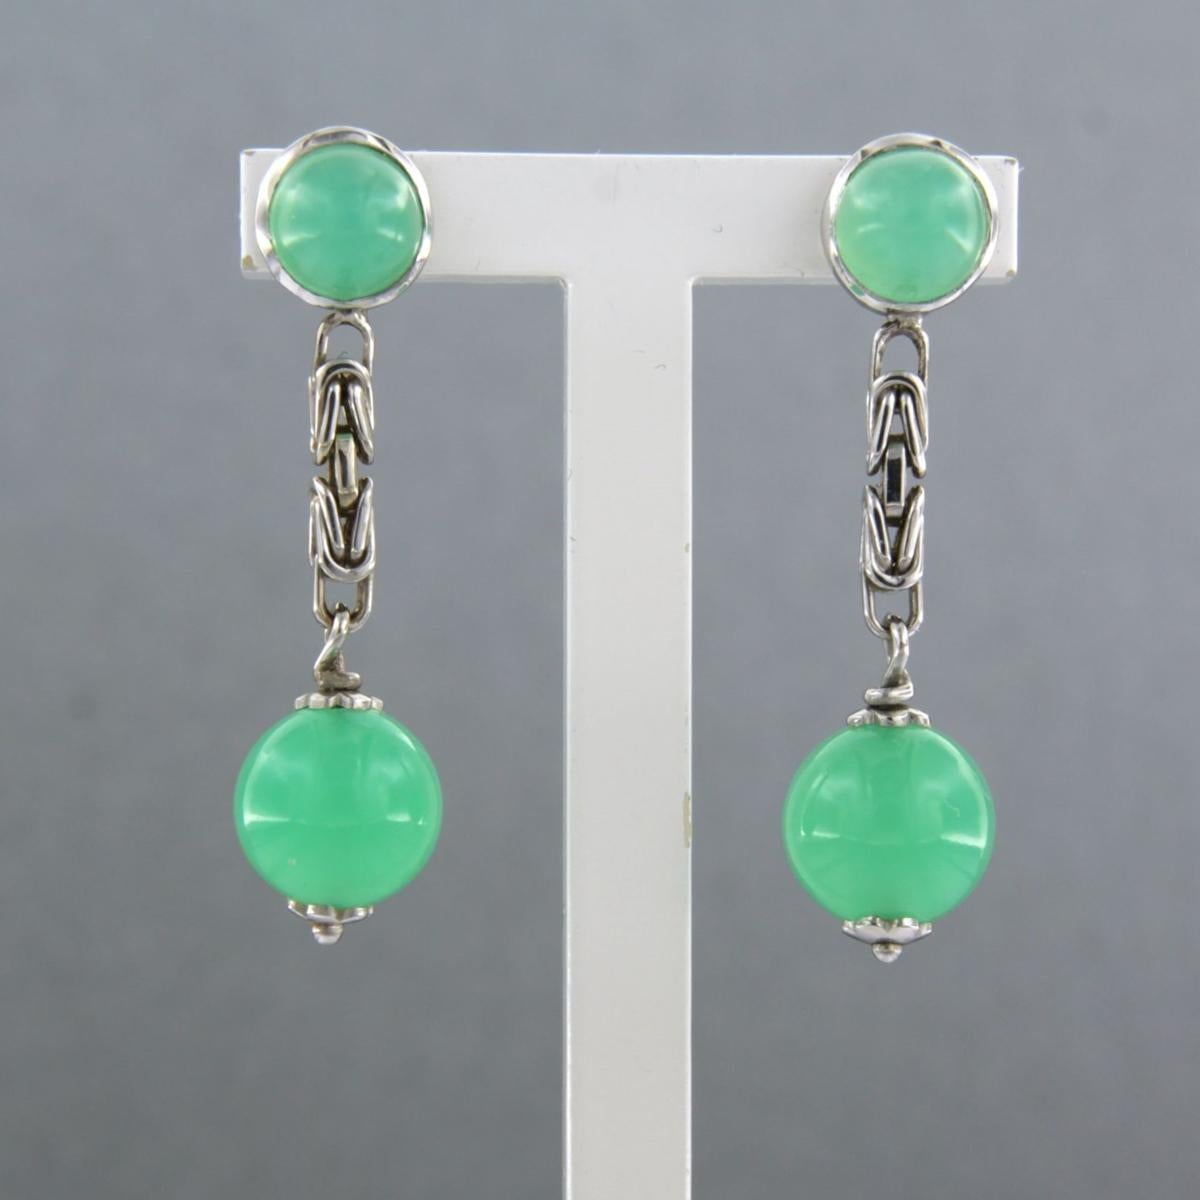 18k white gold earrings with chrysophrase

detailed description:

the top of the earring is 3.1 cm long by 8.3 mm wide

weight 5.1 grams

set with

- 2 x 5.7 mm cabachon cut chrysophrase

- 2 x 8.3 mm round bead shape cut chrysoprase

color